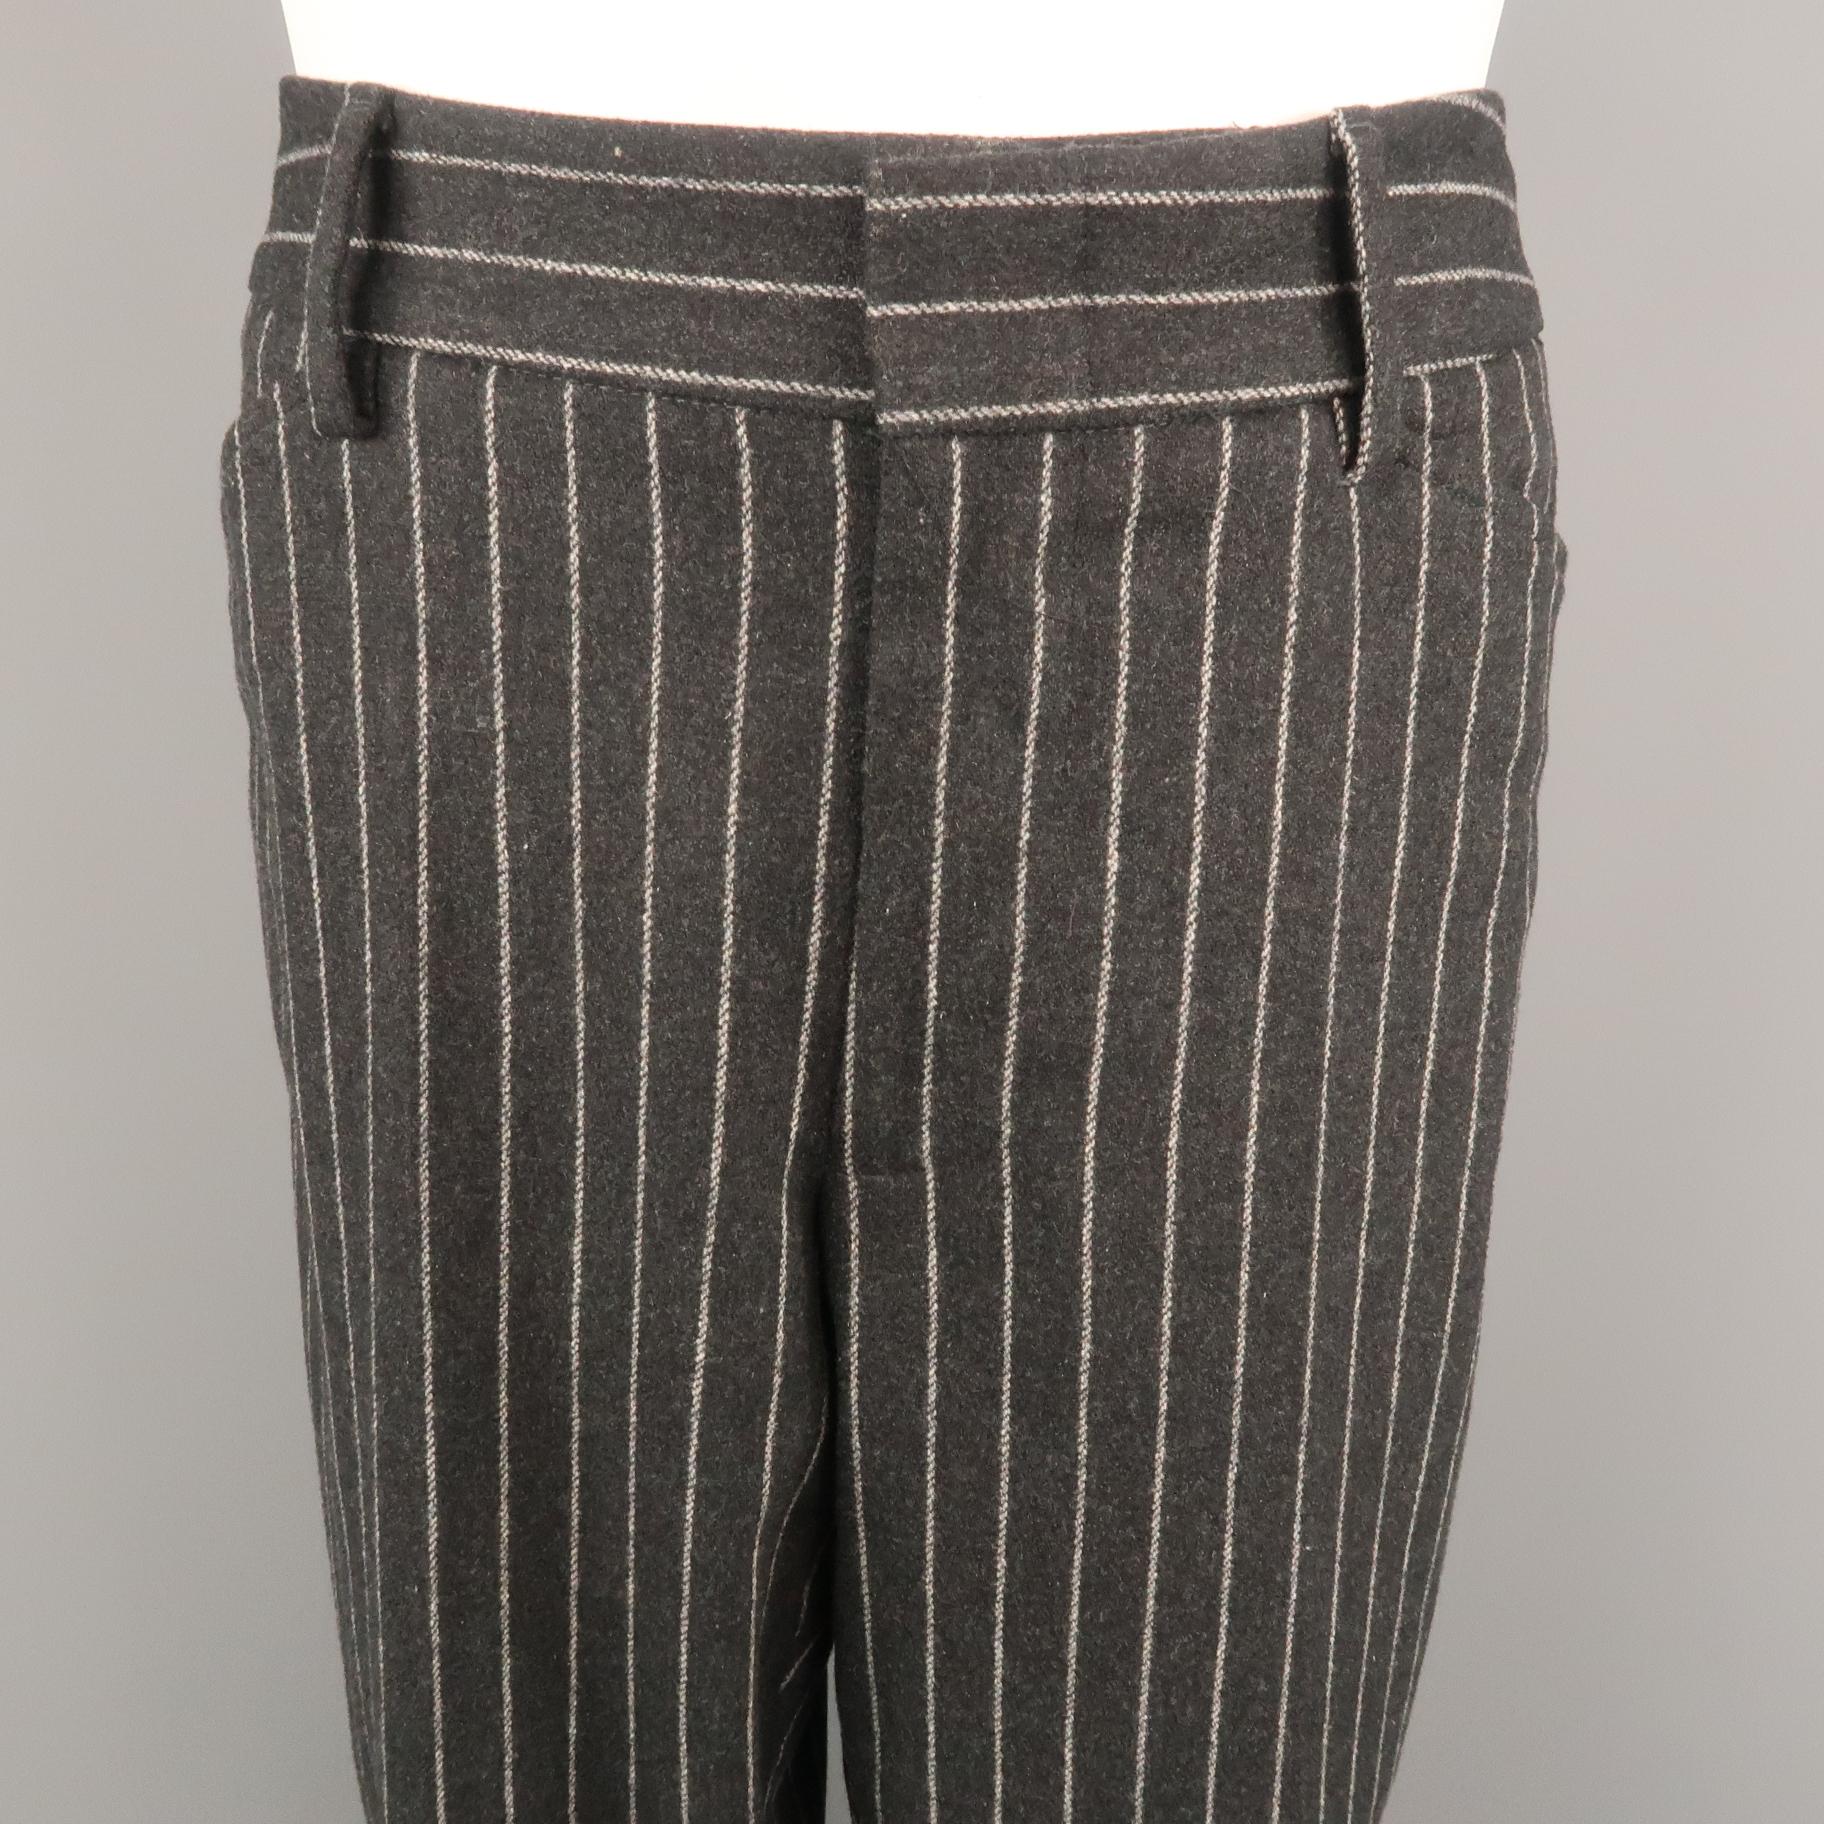 DOLCE & GABBANA dress pant comes in a charcoal chalk-stripe wool blend featuring a flat front and cuffed hem style. Made in Italy.
 
Excellent Pre-Owned Condition.
Marked: IT 52
 
Measurements:
 
Waist: 36 in.
Rise: 8 in.
Inseam: 30 in.